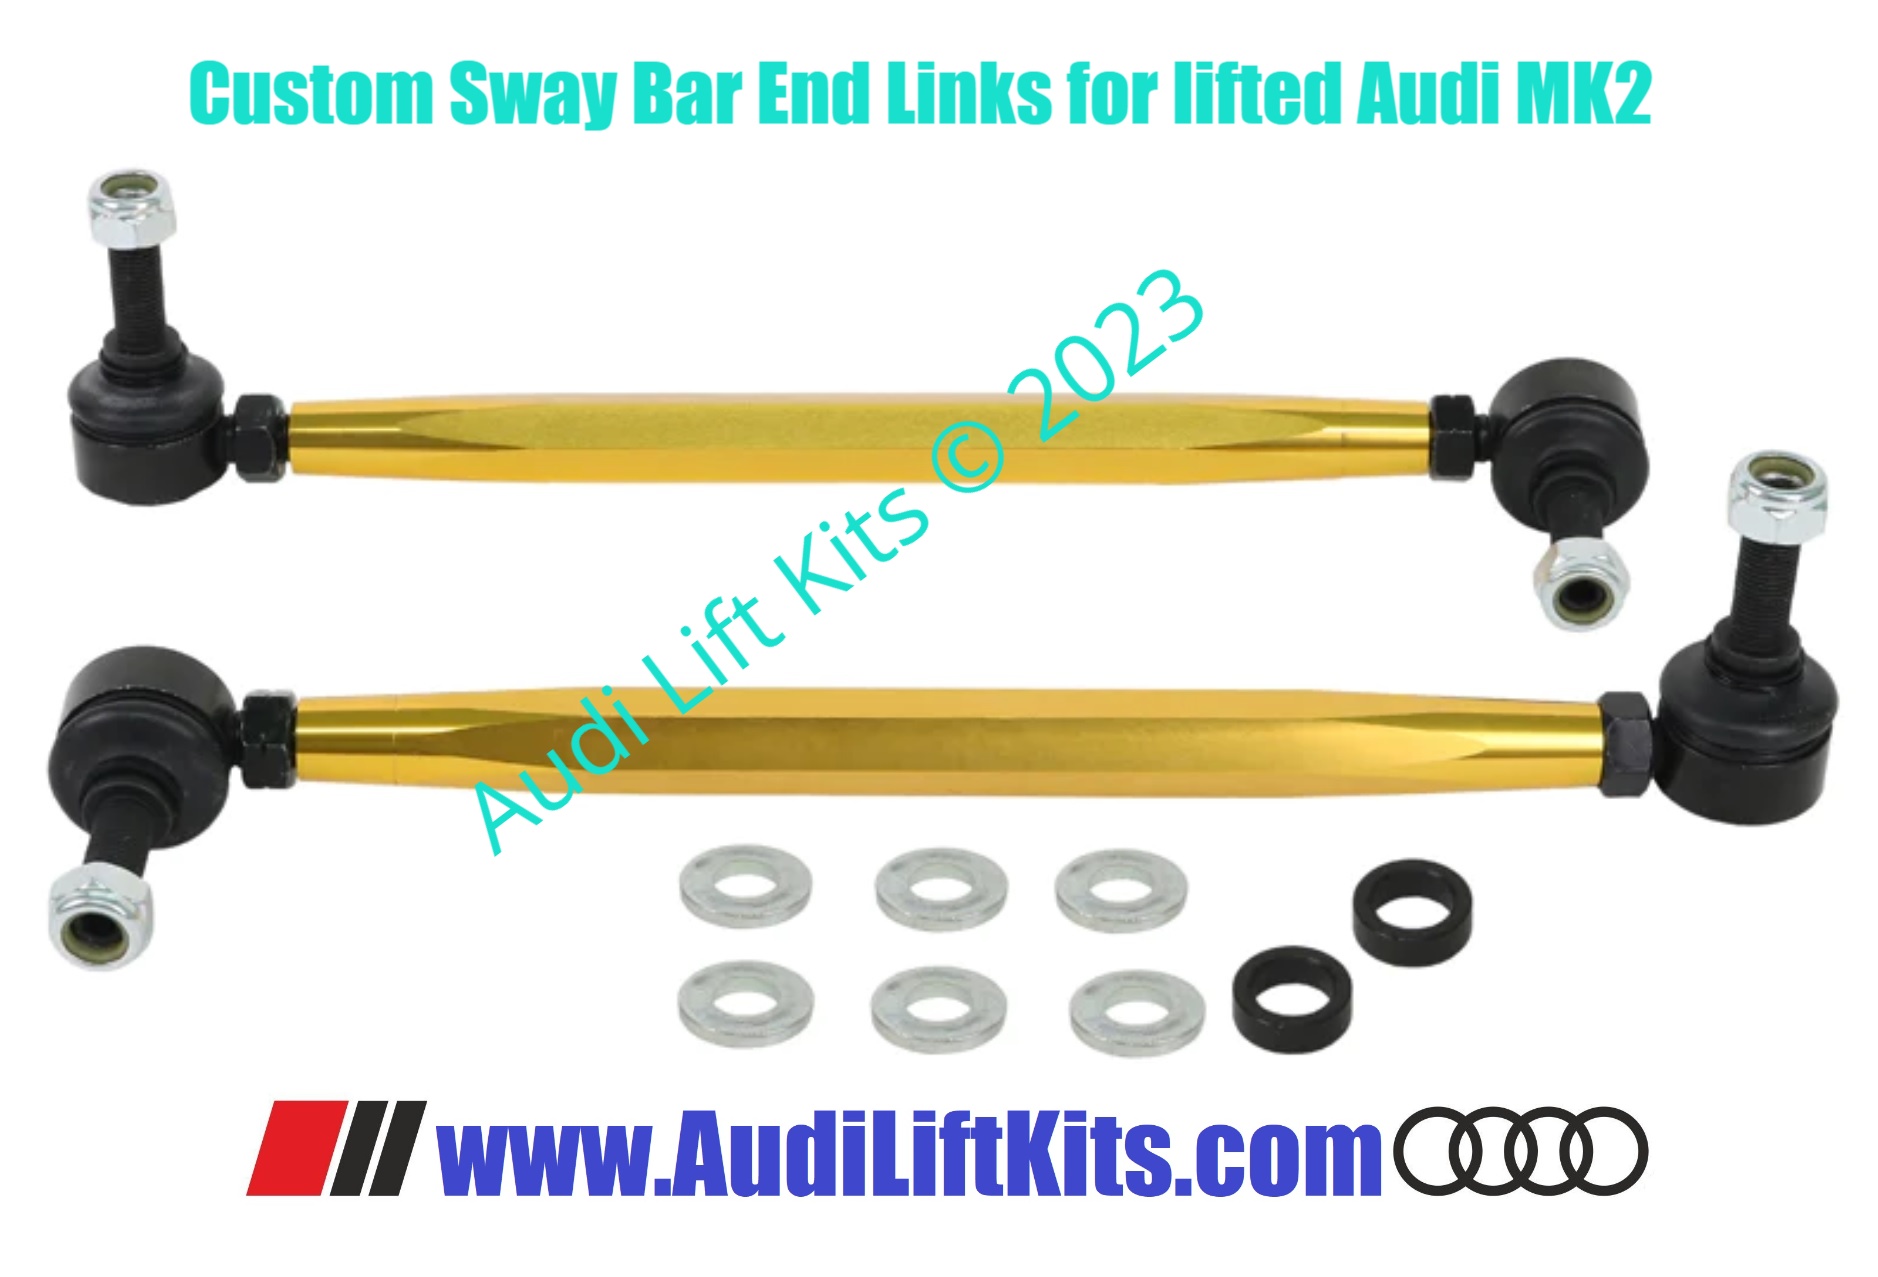 Custom Extended Sway Bar End Links for Lifted Audi Vehicles